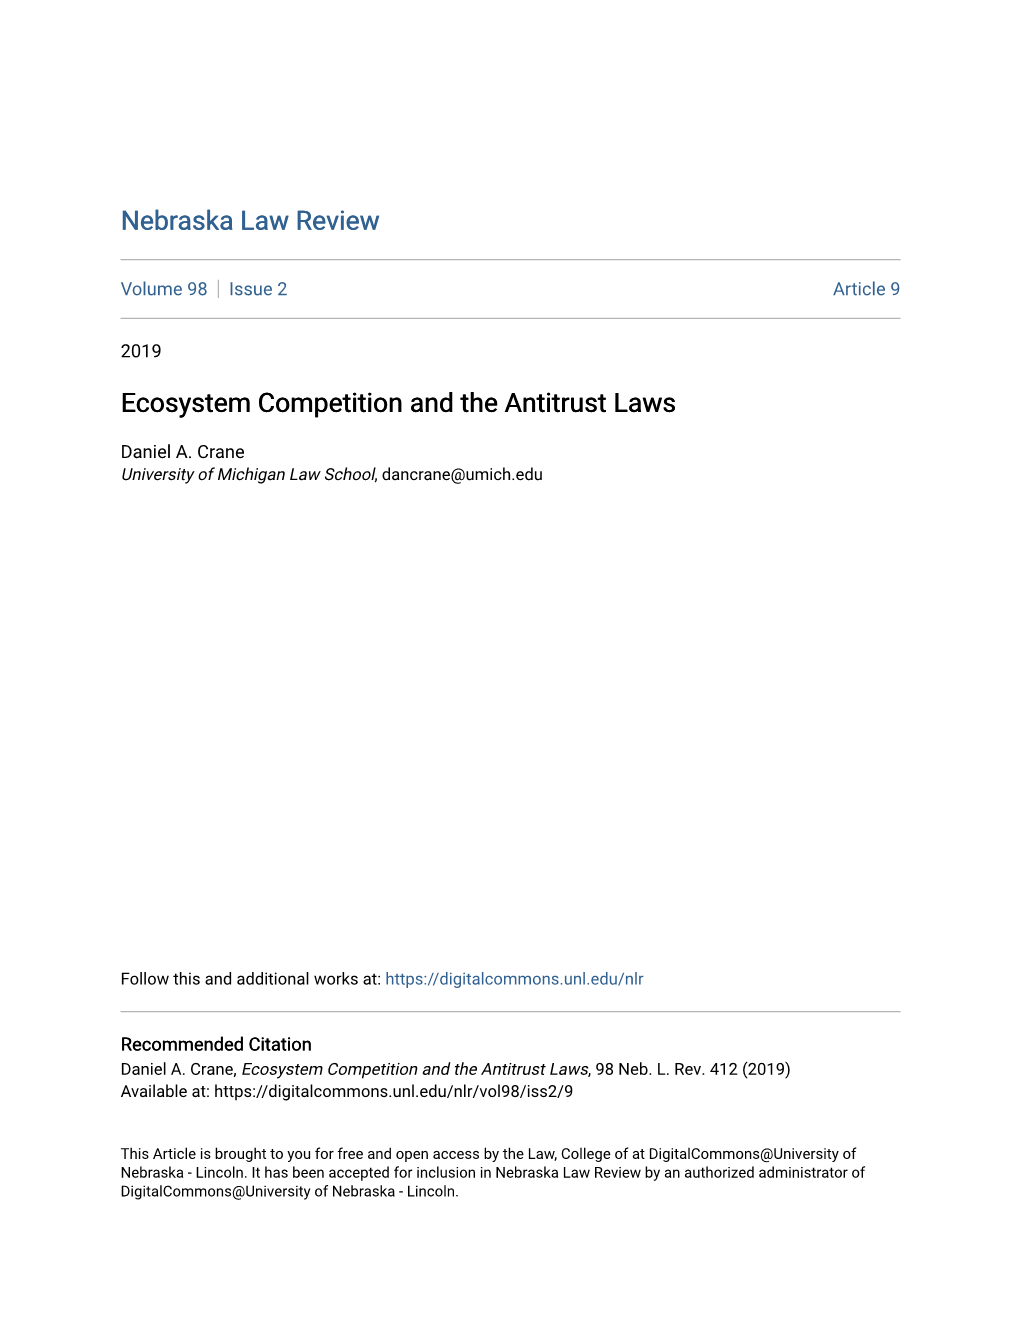 Ecosystem Competition and the Antitrust Laws